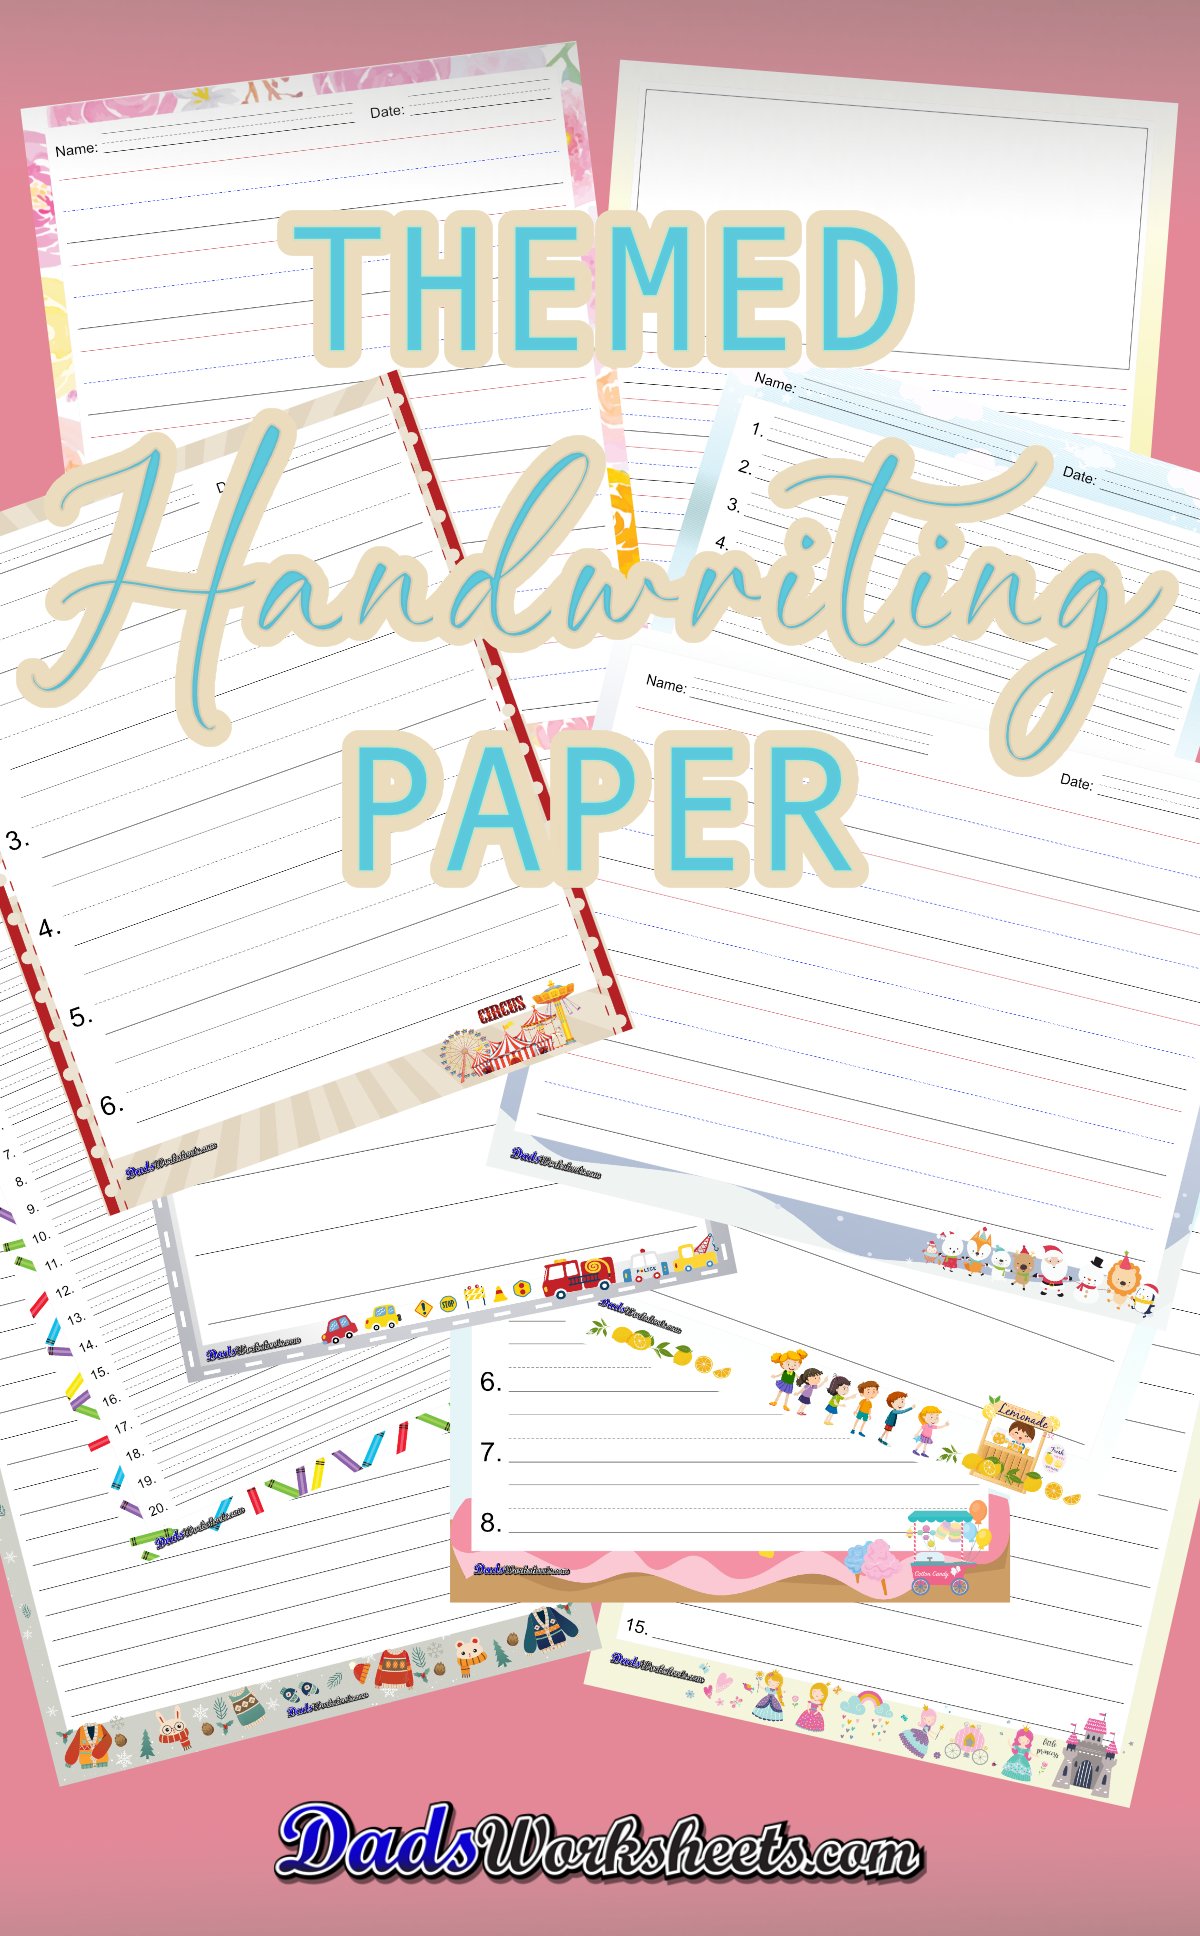 Printable Kids Draw and Write Paper, Kids Handwriting and Drawing Paper,  Story Paper, Practice to Write PDF ONLY 1 Page 